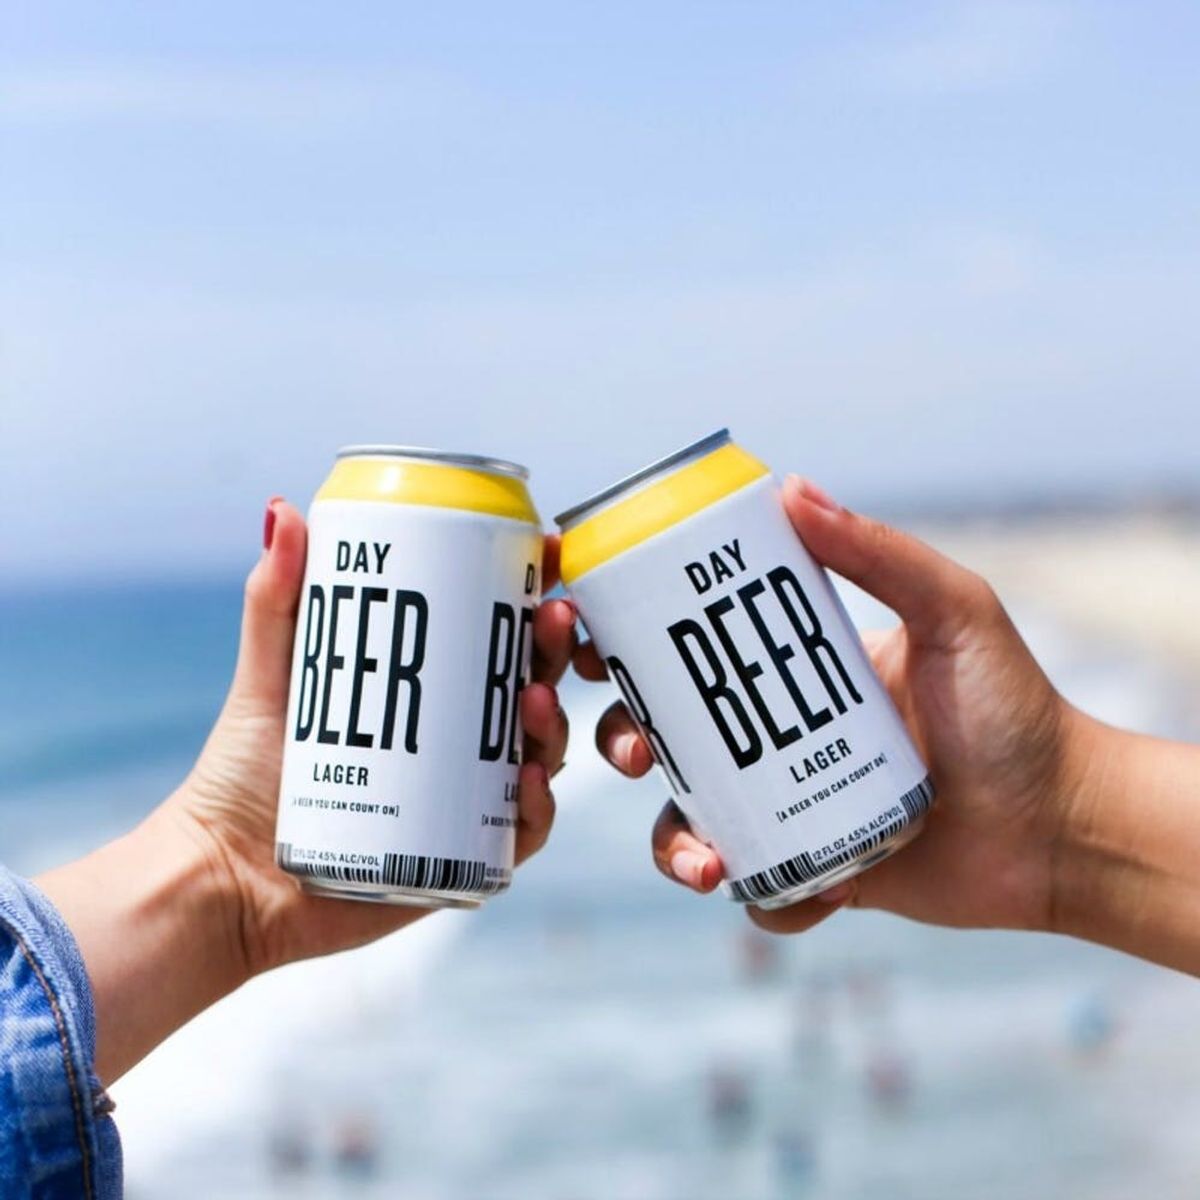 Why “Day Beer” Is the New Drink You’ll Want for Girls’ Night In